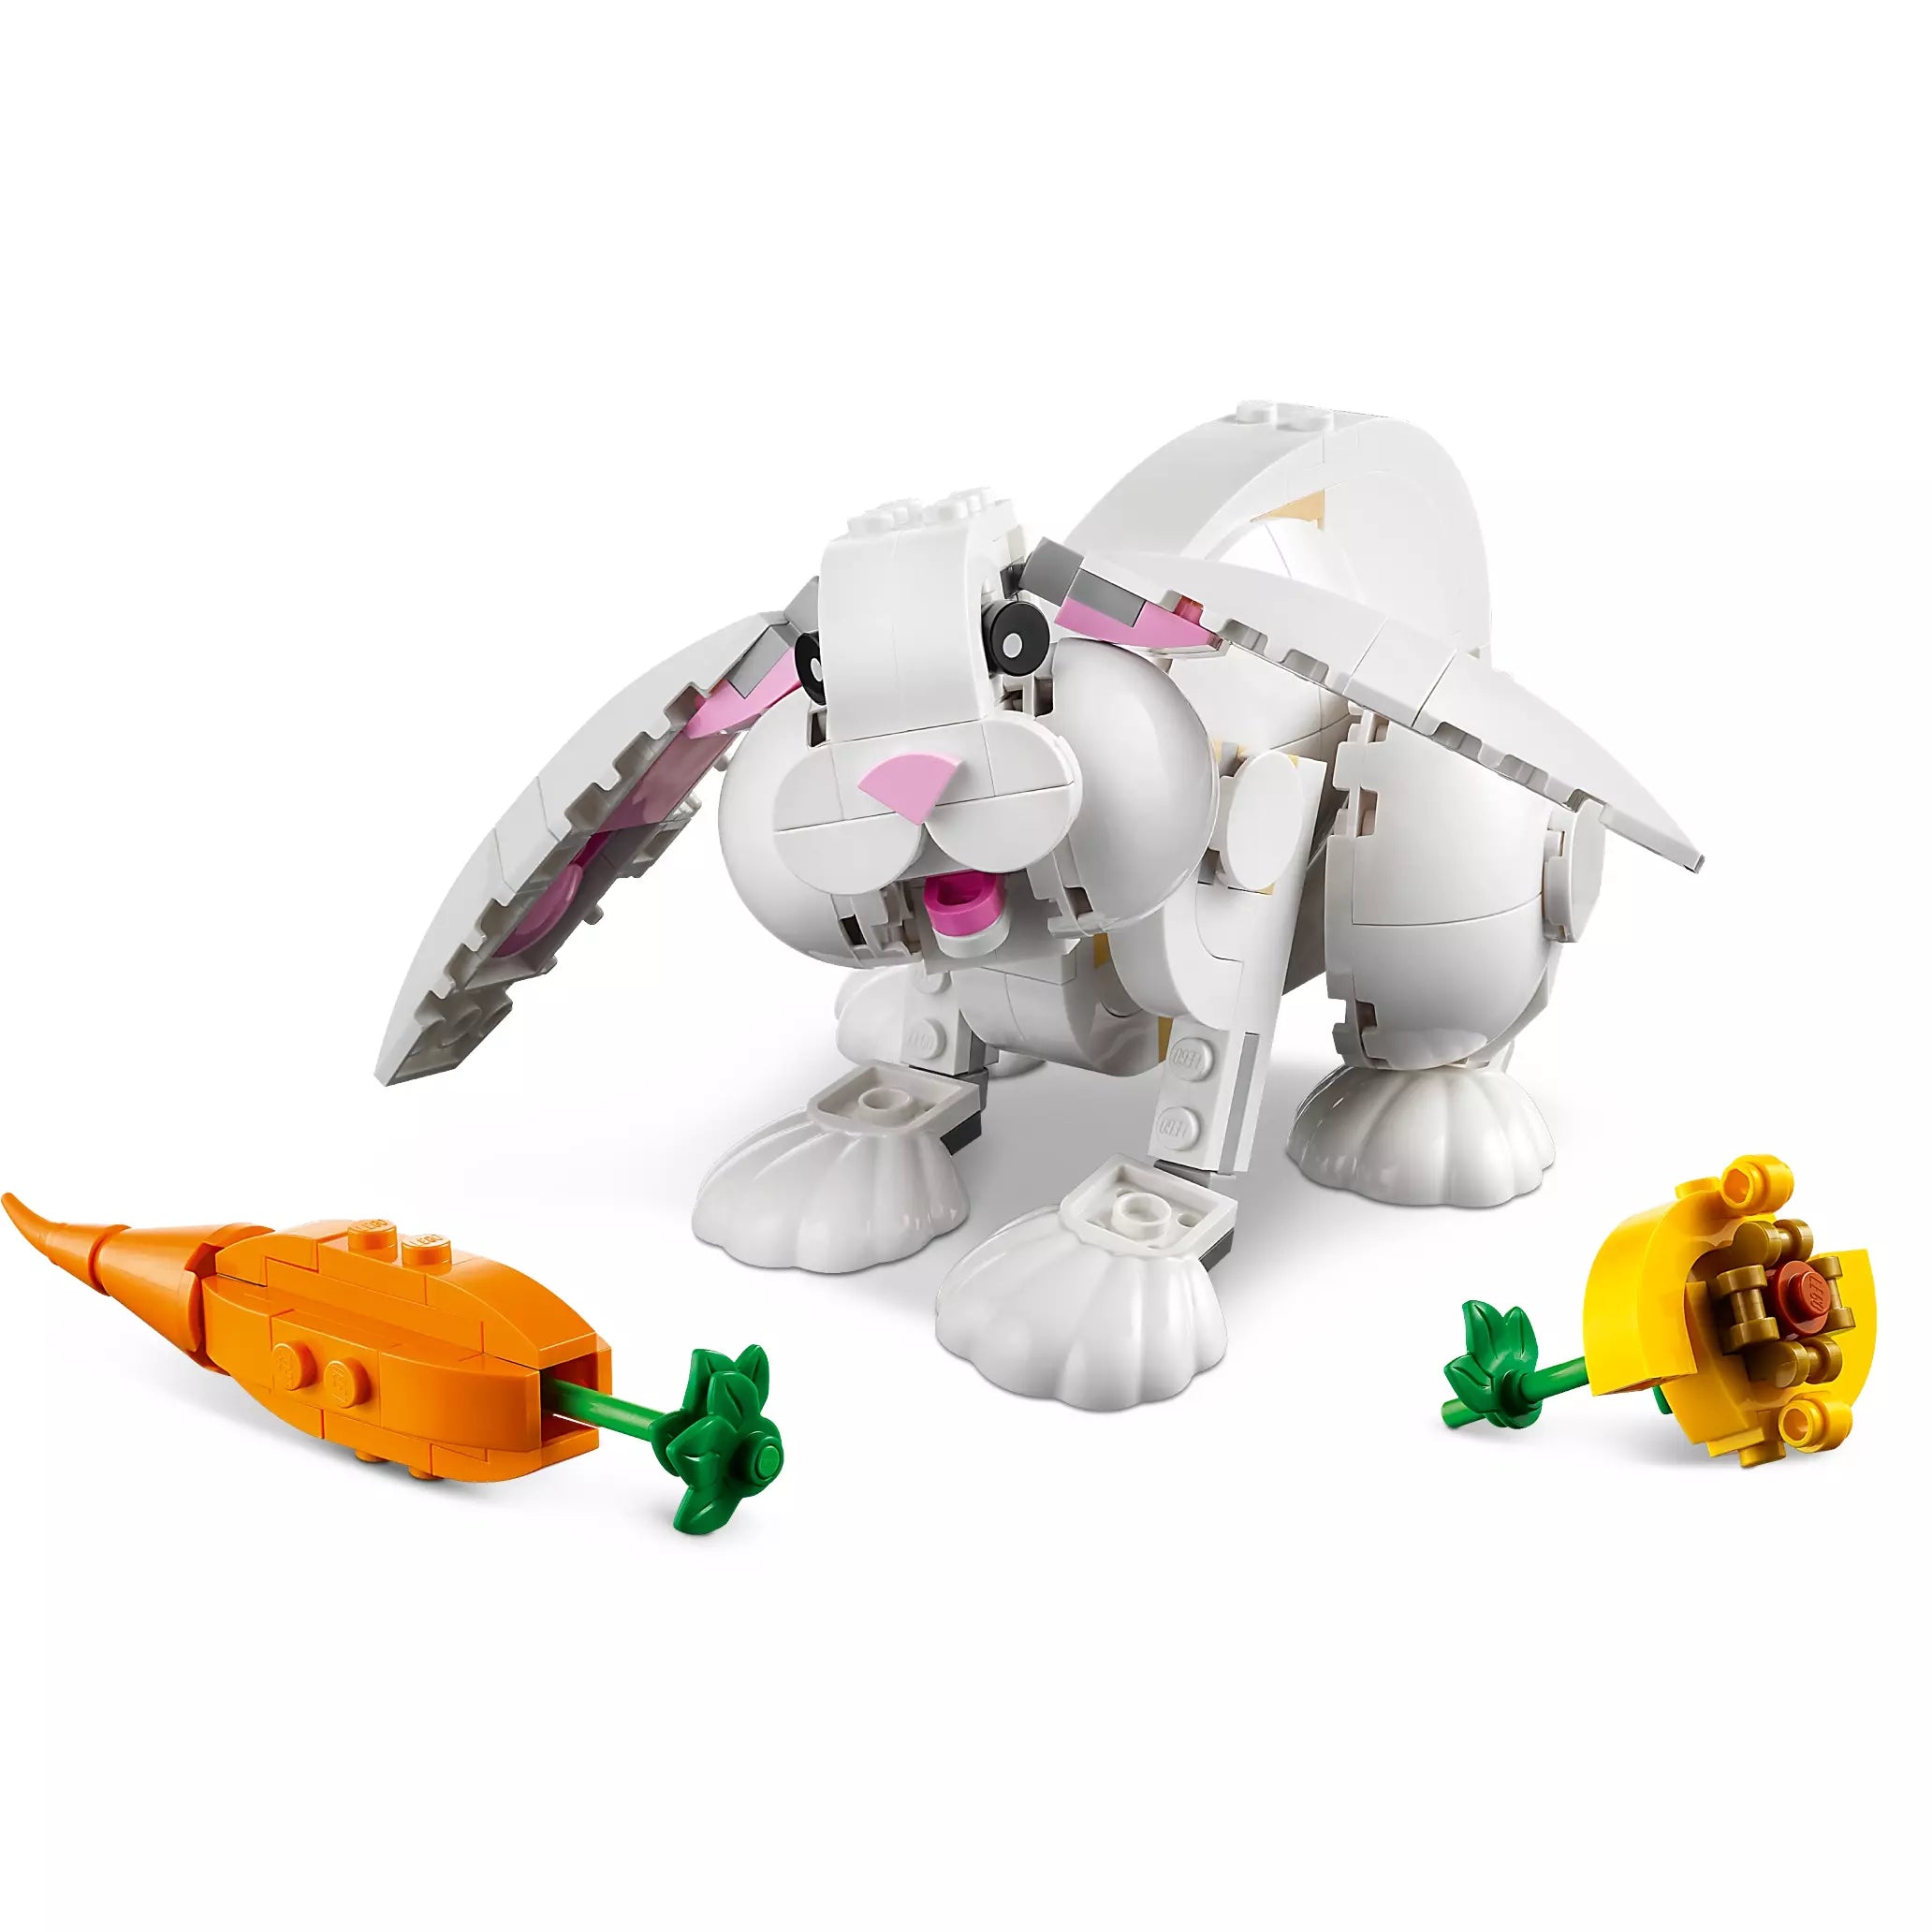 LEGO 31133 Creator 3in1 White Rabbit Animal Toy Building Set, Easter Bunny to Seal and Parrot Figures.